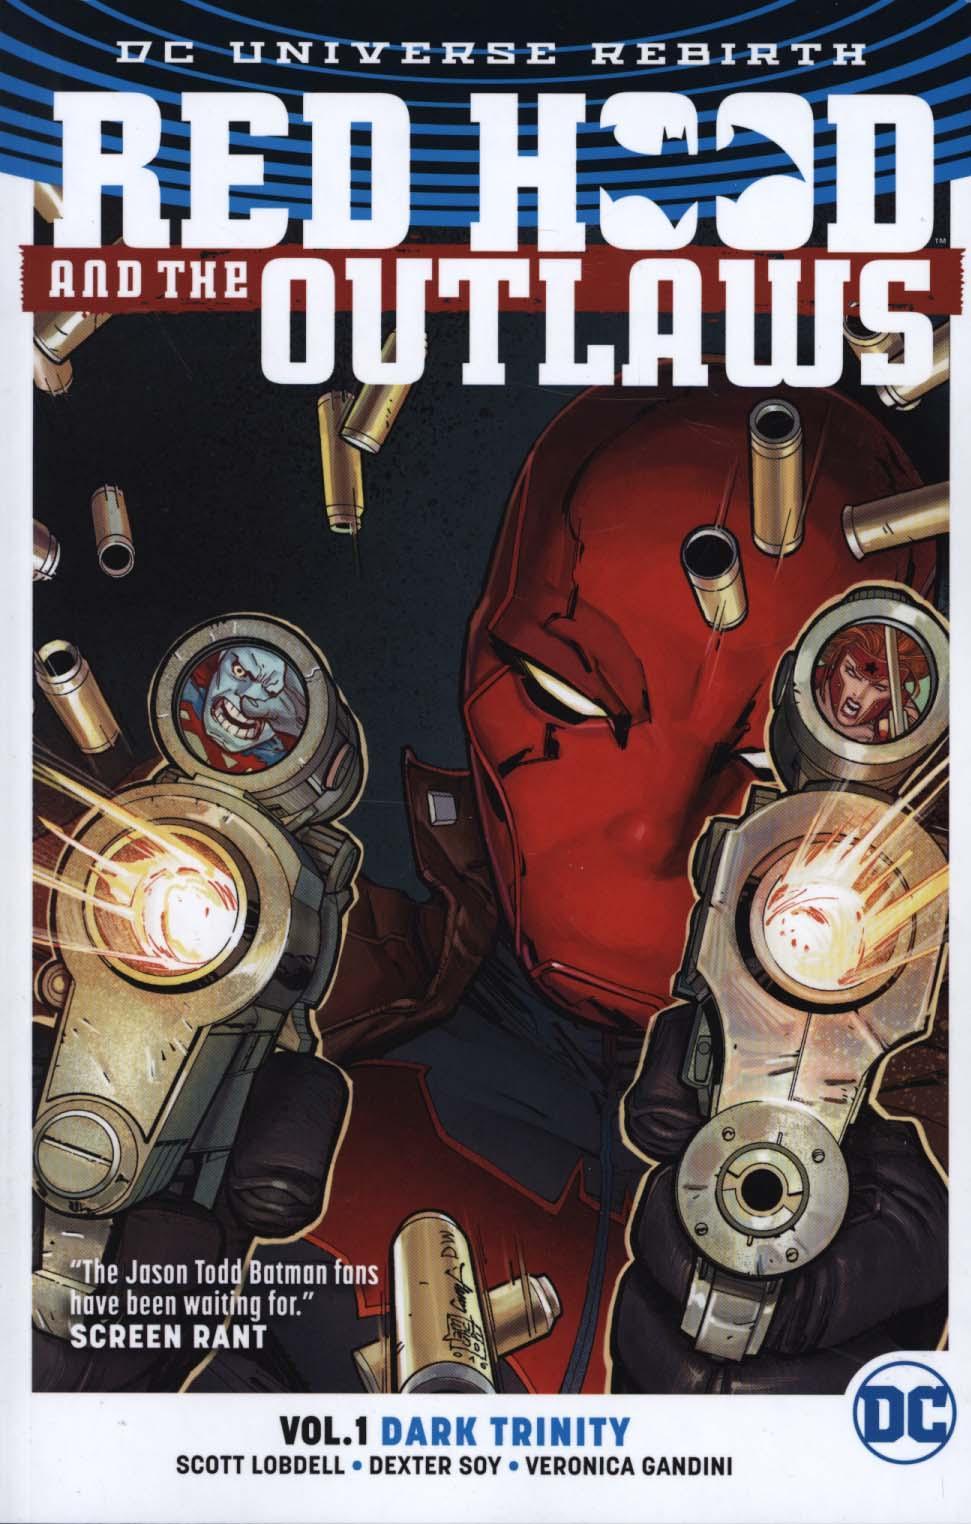 Red Hood And The Outlaws Vol. 1 Dark Trinity (Rebirth)